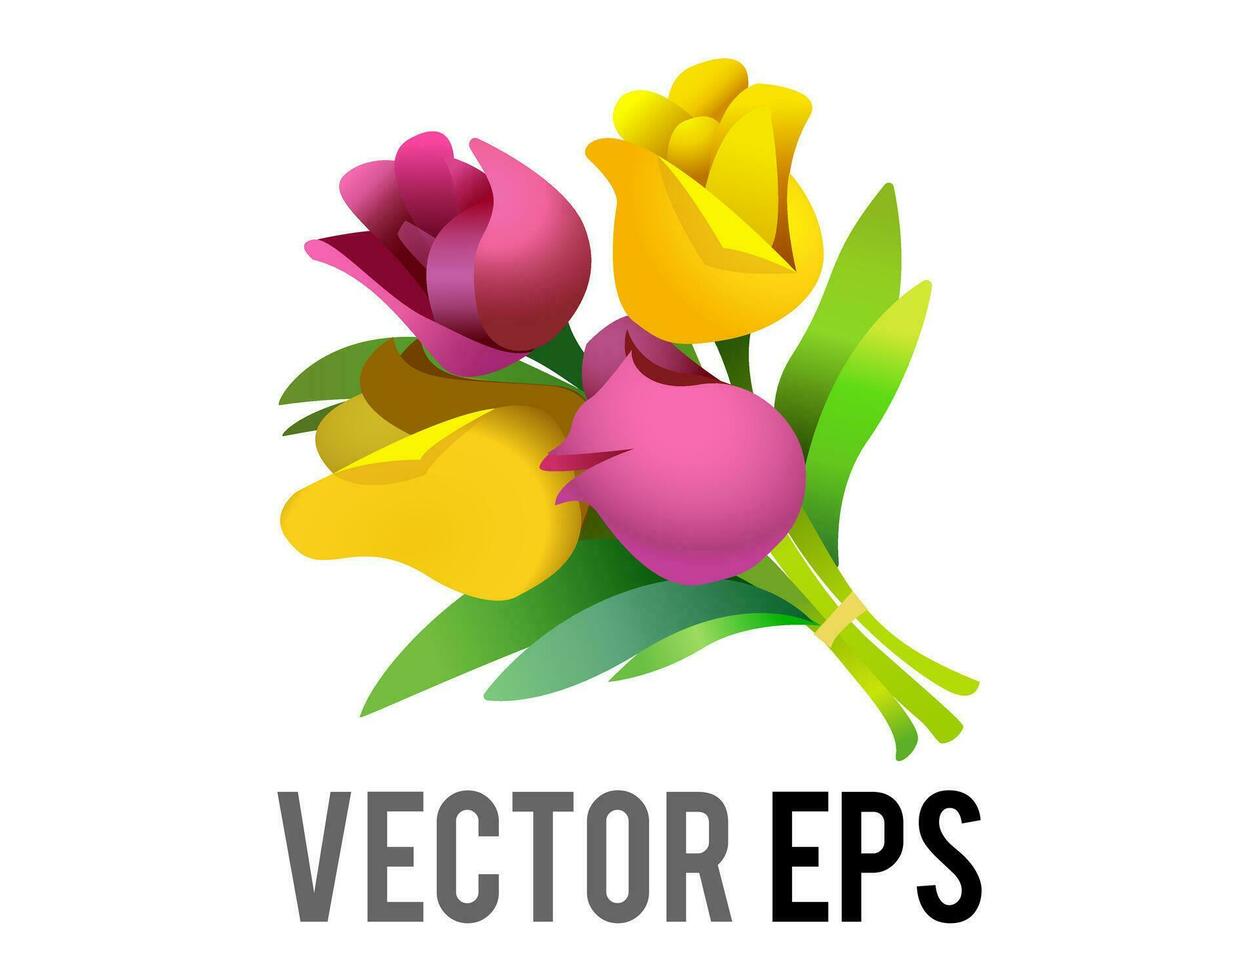 Vector bouquet of pink and yellow flowers icon with green stems tied